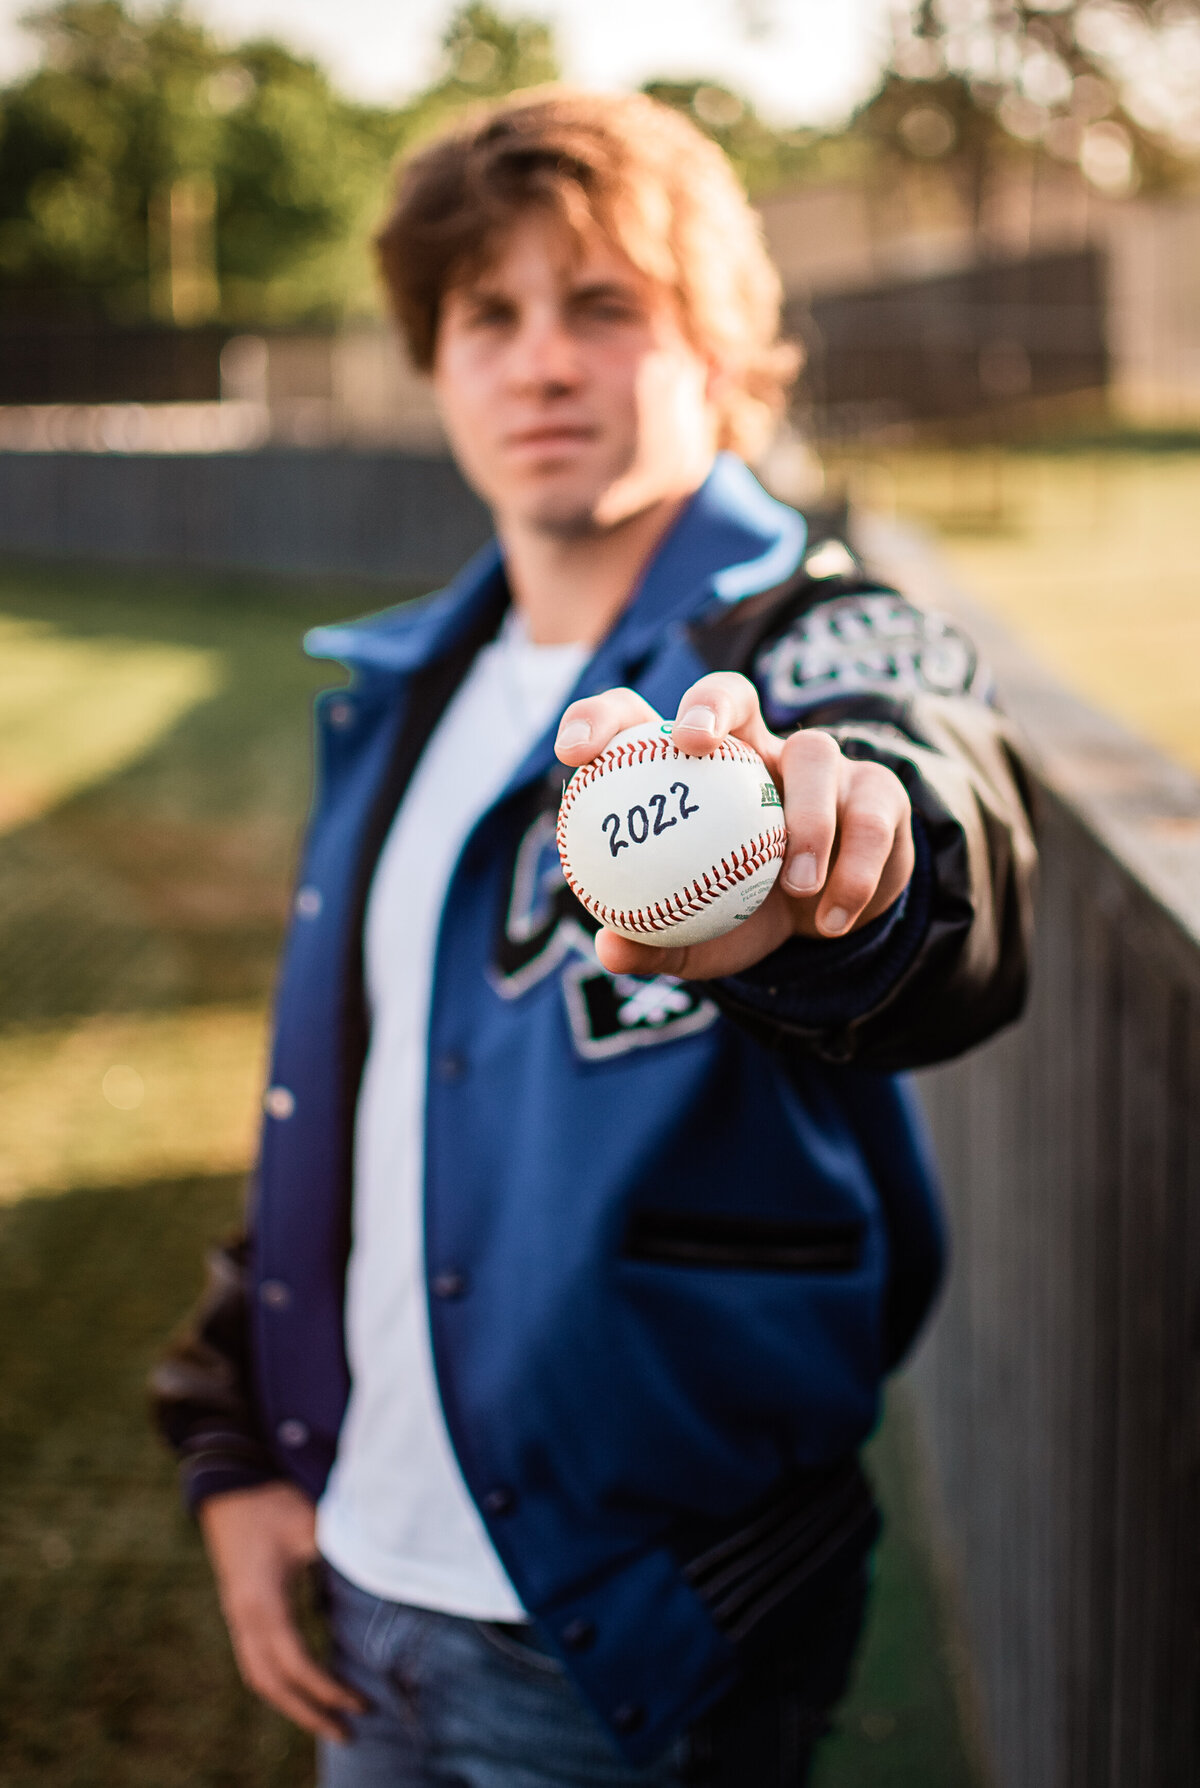 A baseball player at Clear Springs High School wears hit letterman while holding a baseball toward the camera.